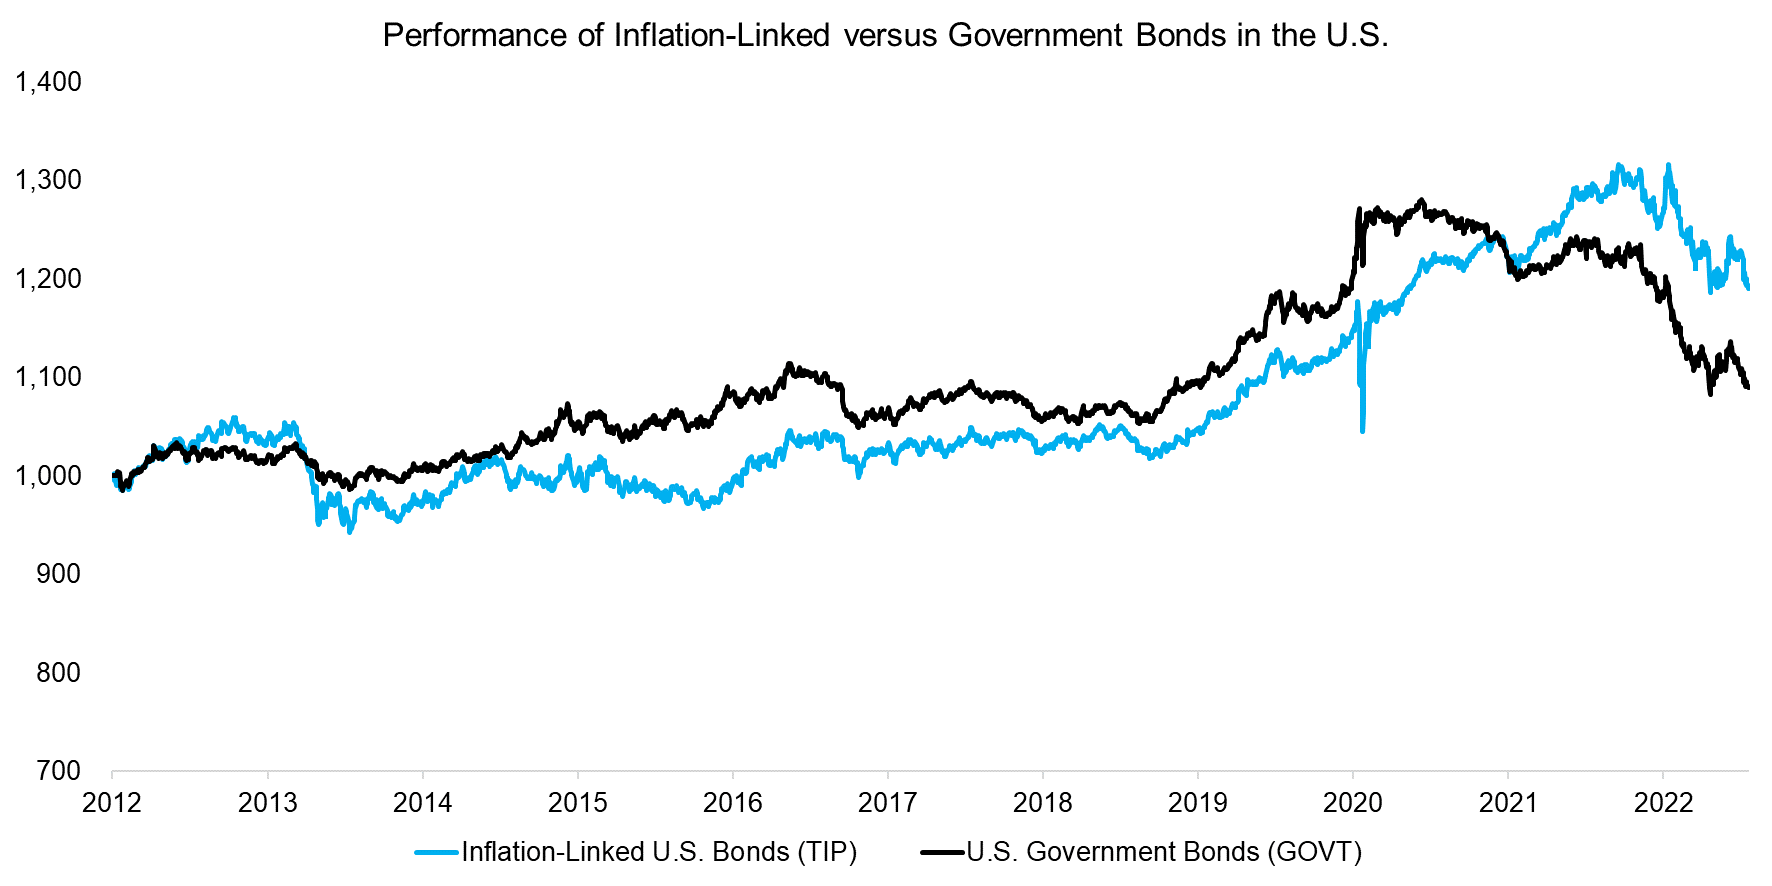 Performance of Inflation-Linked versus Government Bonds in the U.S.